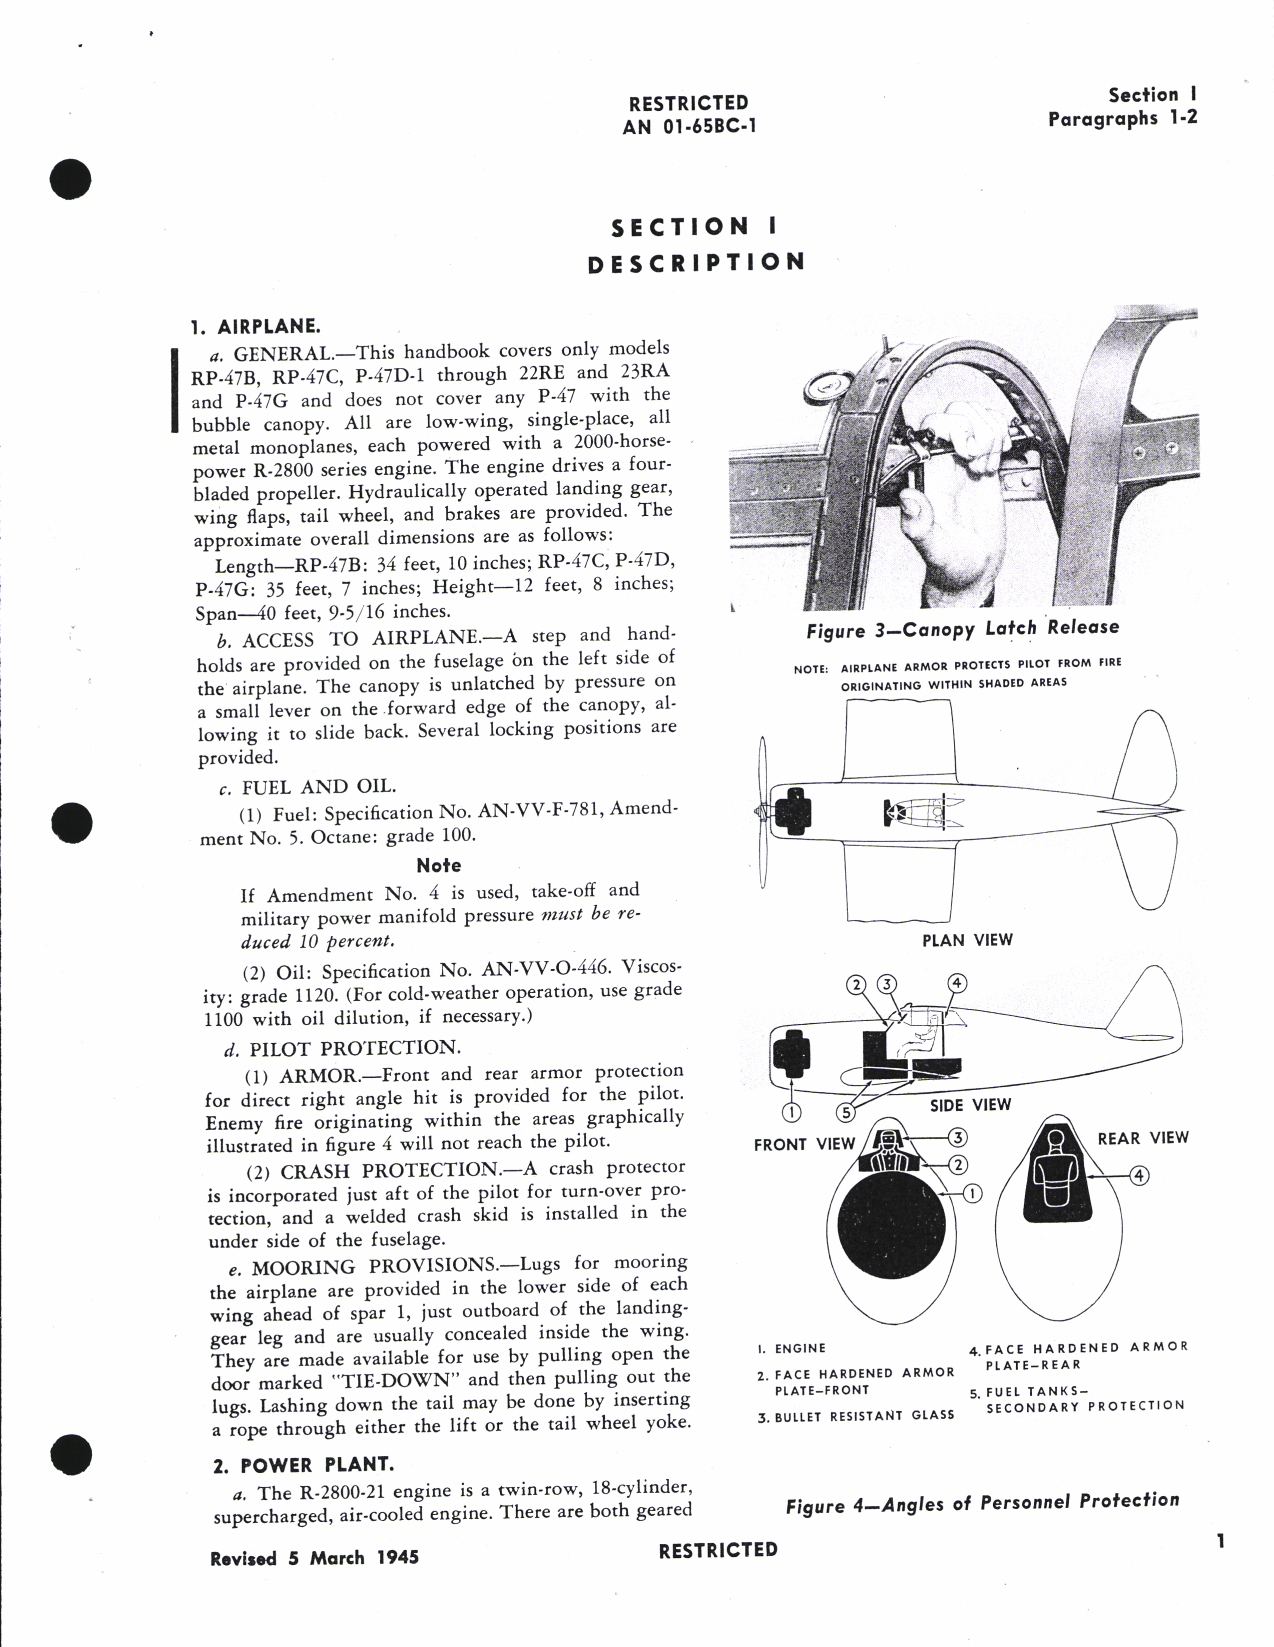 Sample page 5 from AirCorps Library document: Pilot's Flight Operating Instructions for RP-47B, RP-47C, P-47G, and P-47D